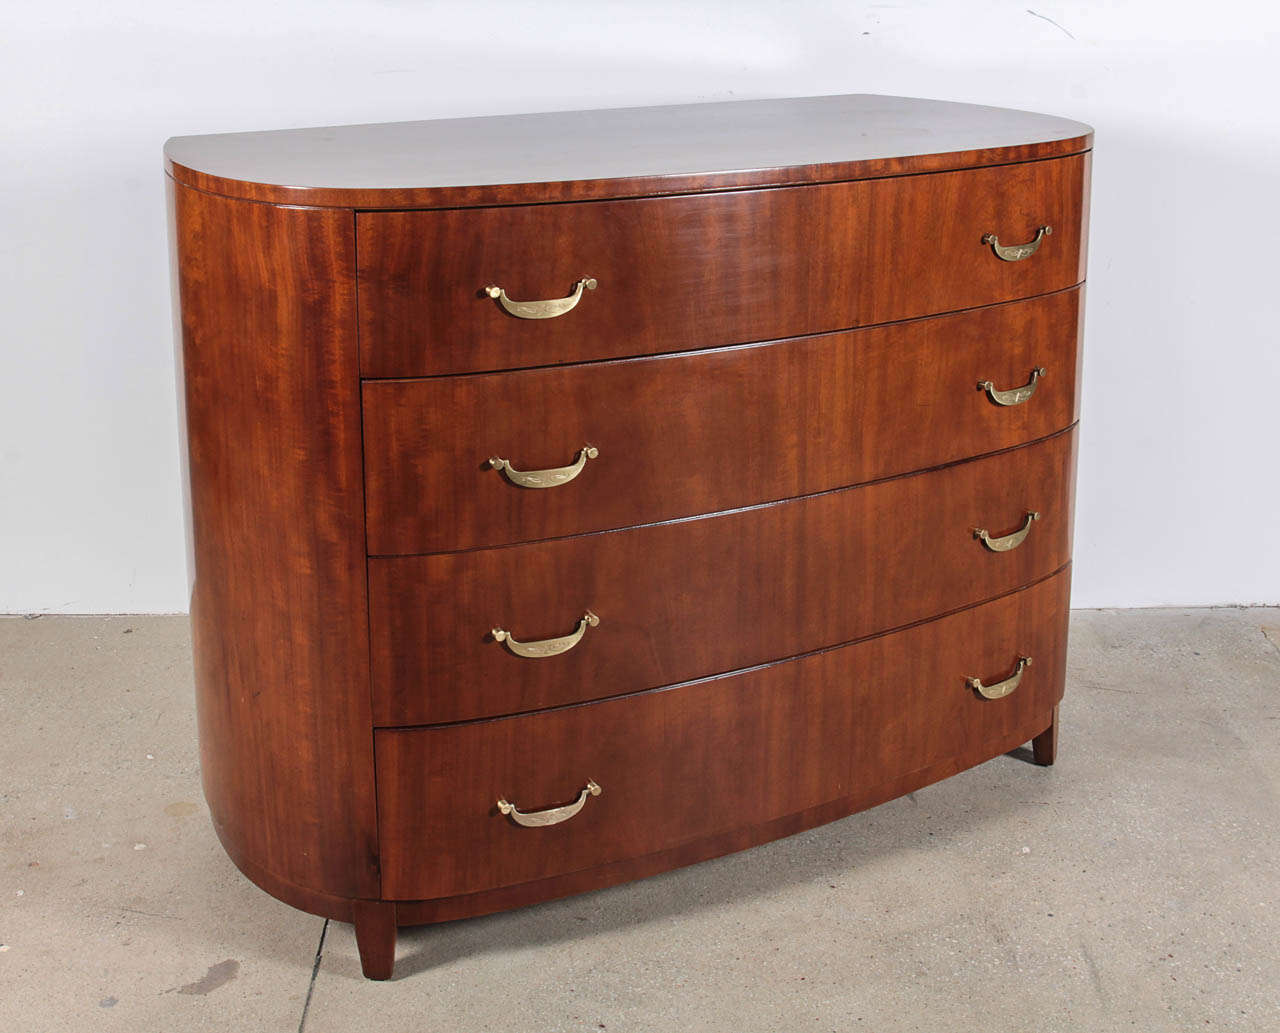 American Art Deco Bowed Front Chest of Drawers by Ralph Widdicomb